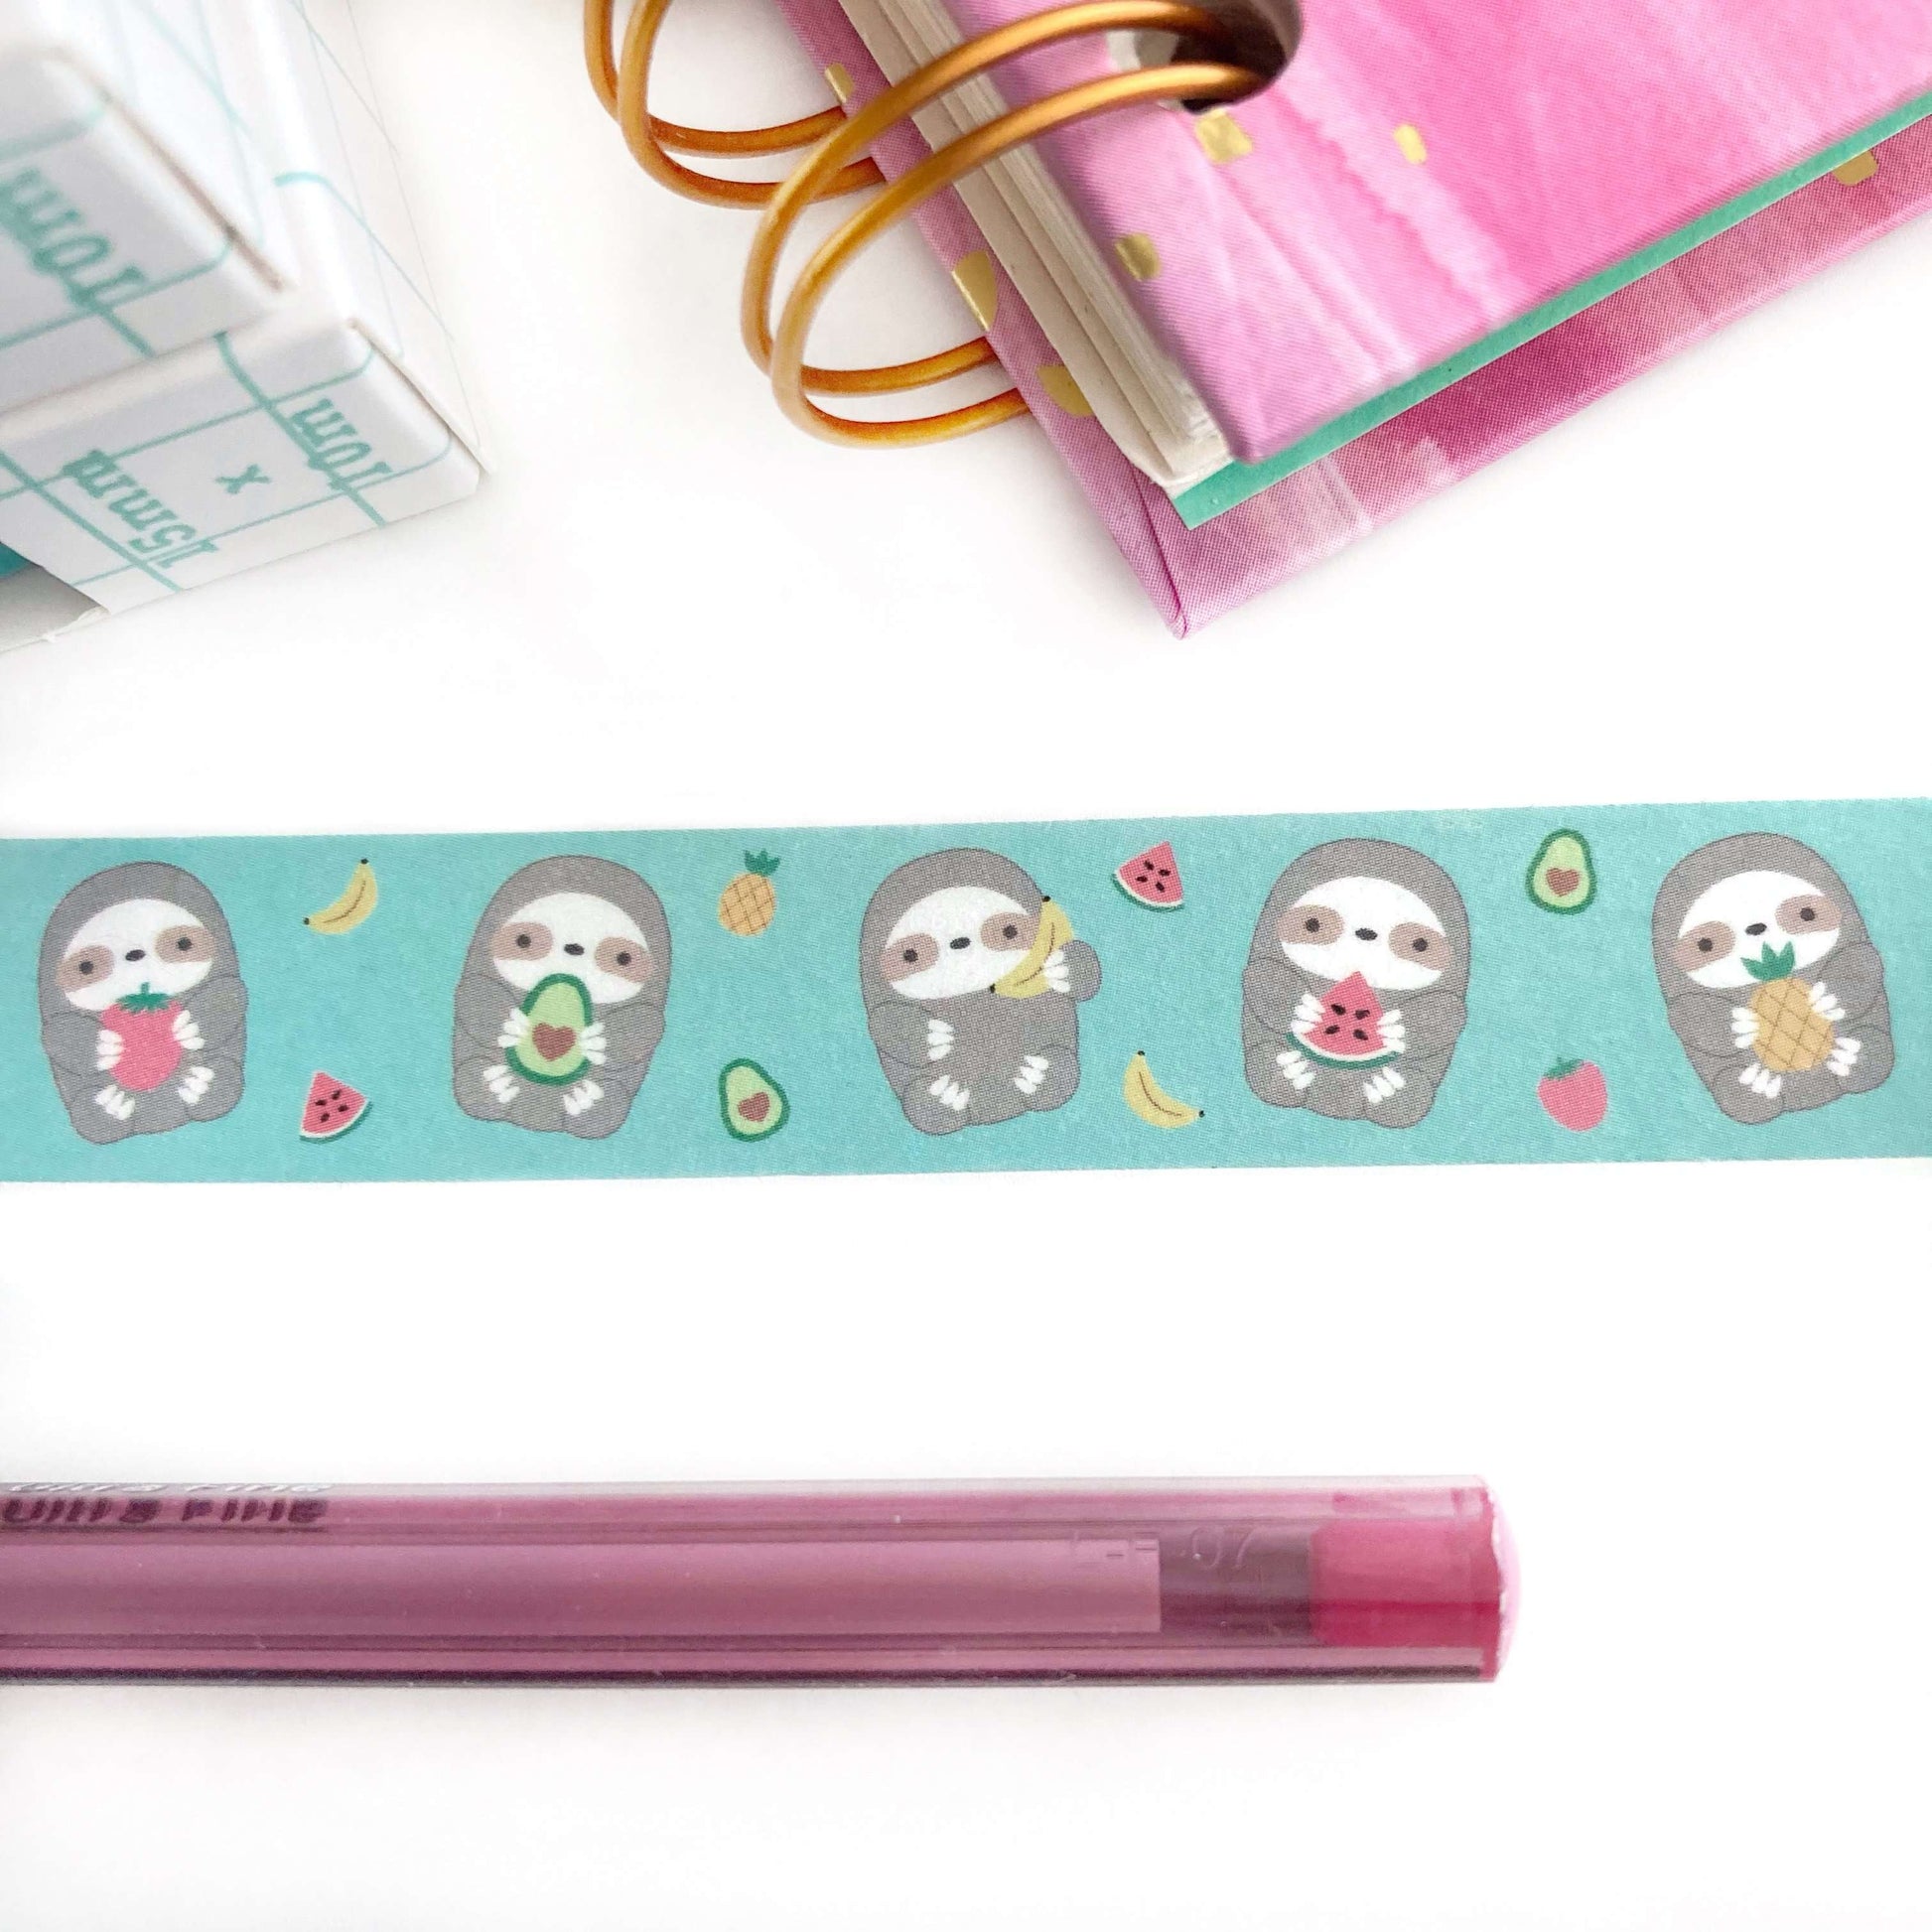 Fruit Sloth Washi Tape - Cute Stationery - Sloth Gift - Japanese Washi Tape by Wild Whimsy Woolies